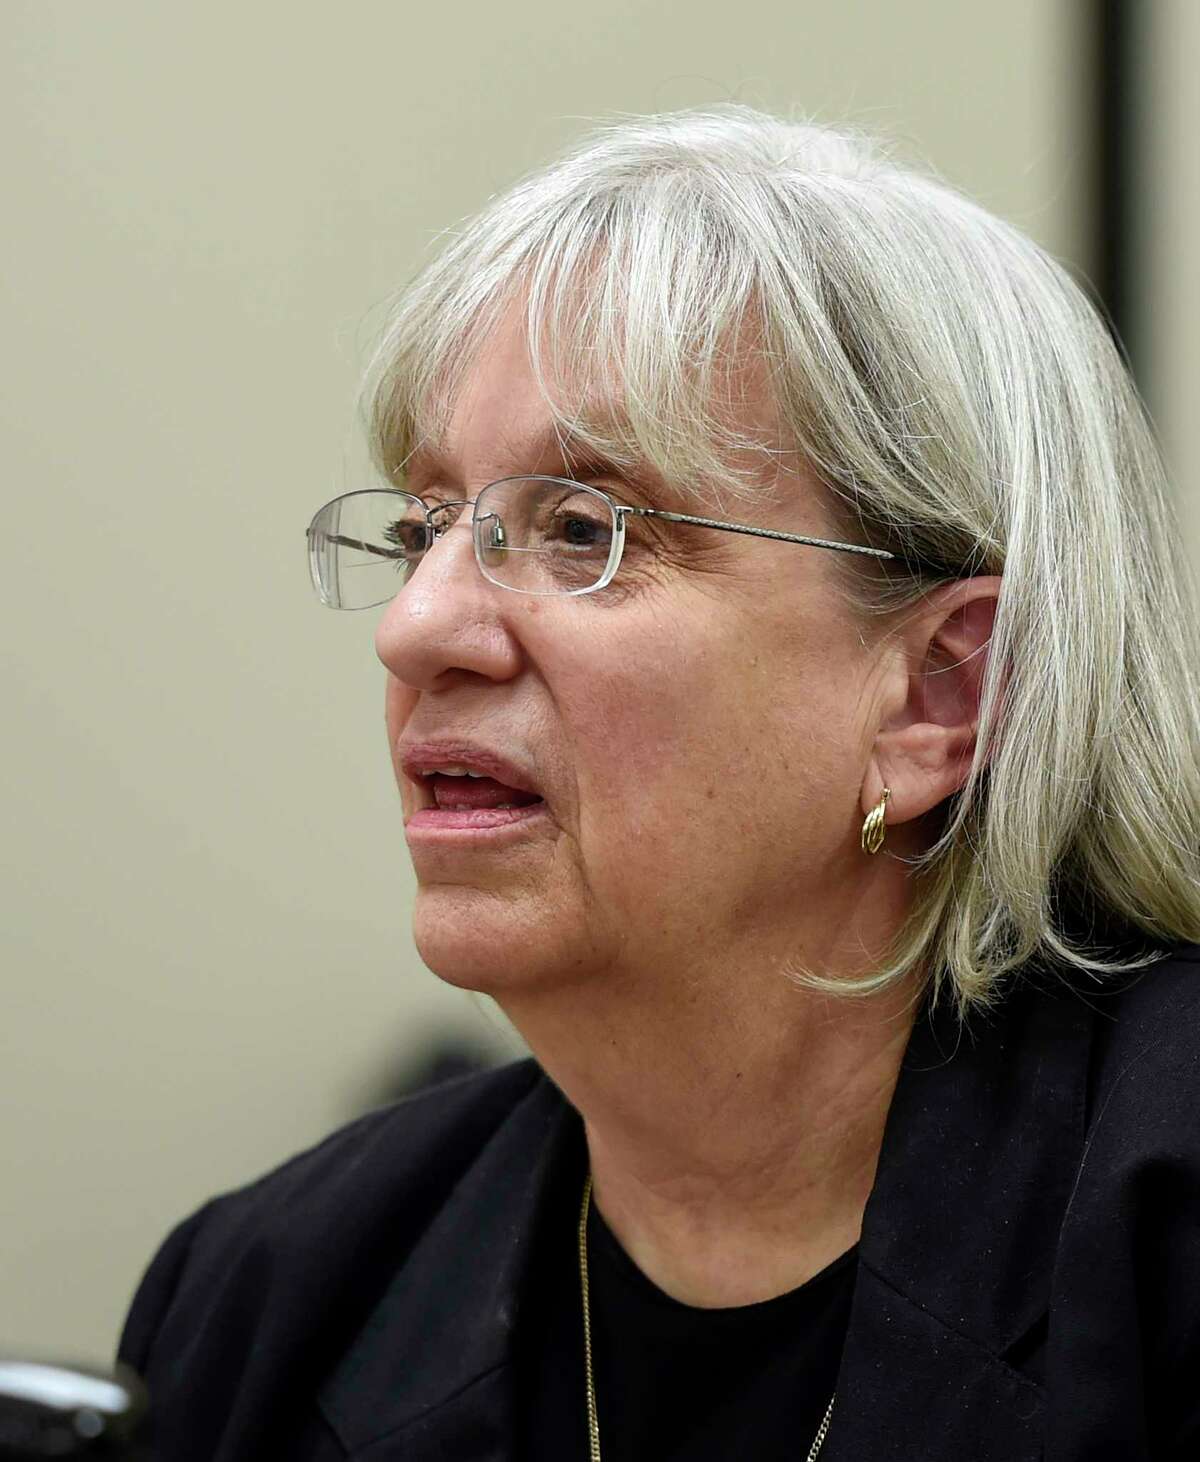 Risa Sugarman, enforcement council for the New York State Board of Elections during the board meeting today Sept. 26, 2014 at their offices in Albany, N.Y. (Skip Dickstein/Times Union)